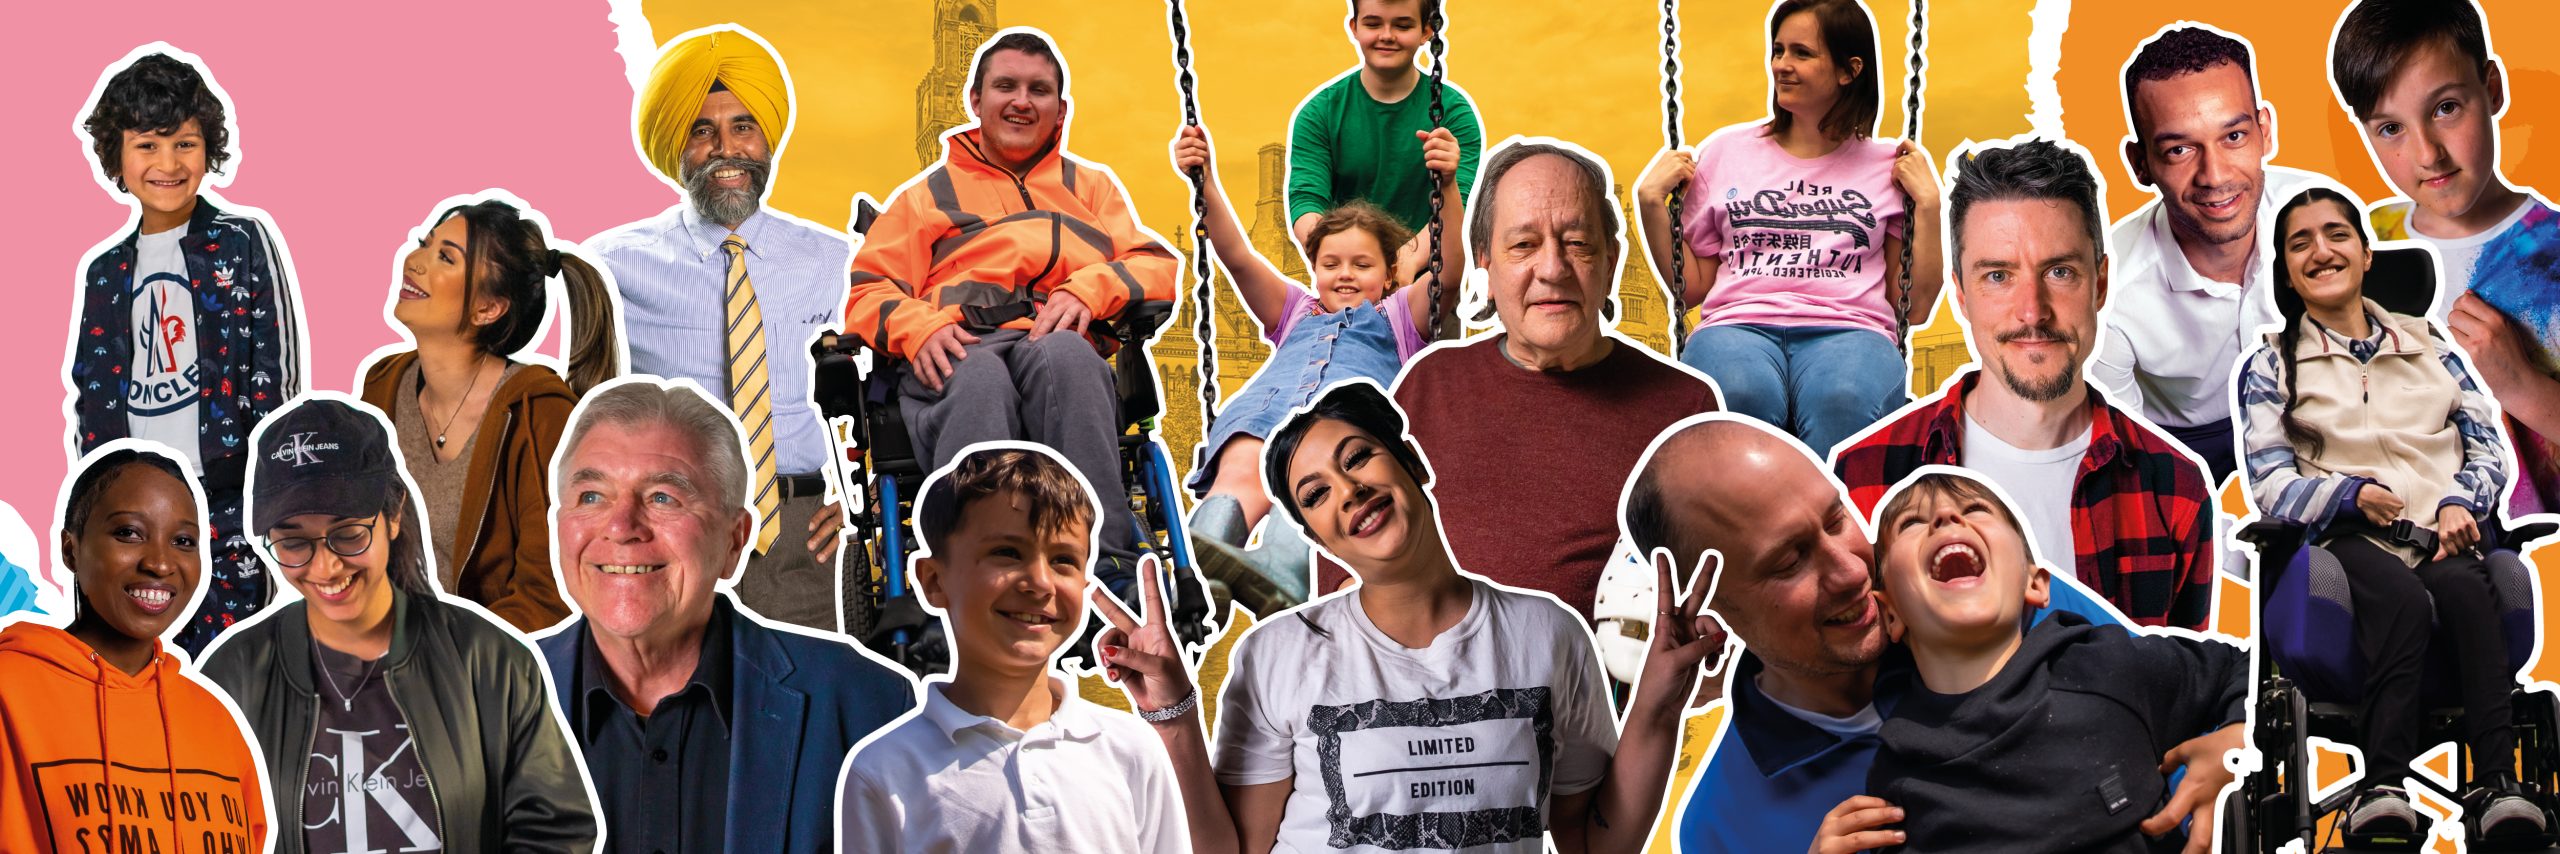 COlourful image containing a diverse range of Bradford District residents.